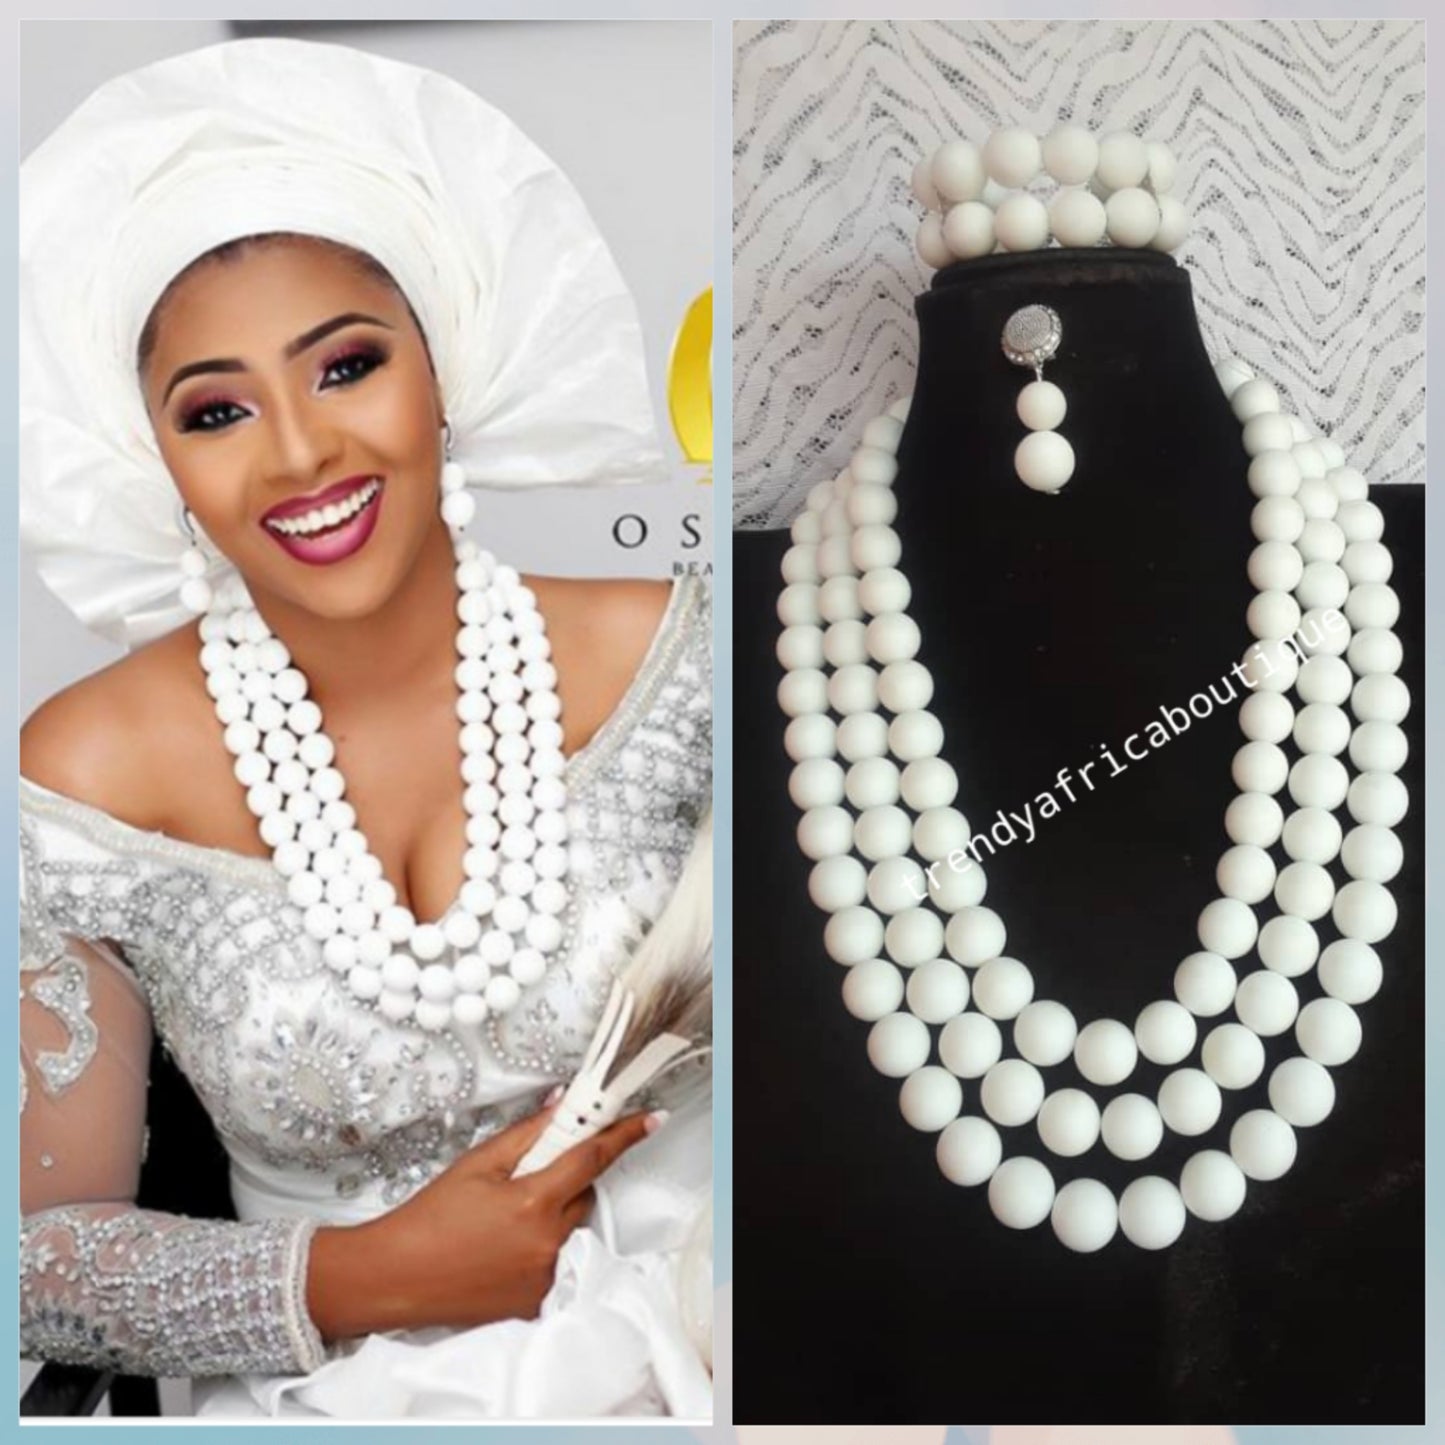 New arrival Original Pure white Stone Nigerian women Coral-necklace set. 3 row necklace for weddings and more. Nigerian Celebrants accessories. Necklace/earrings/ 2 Bracelet